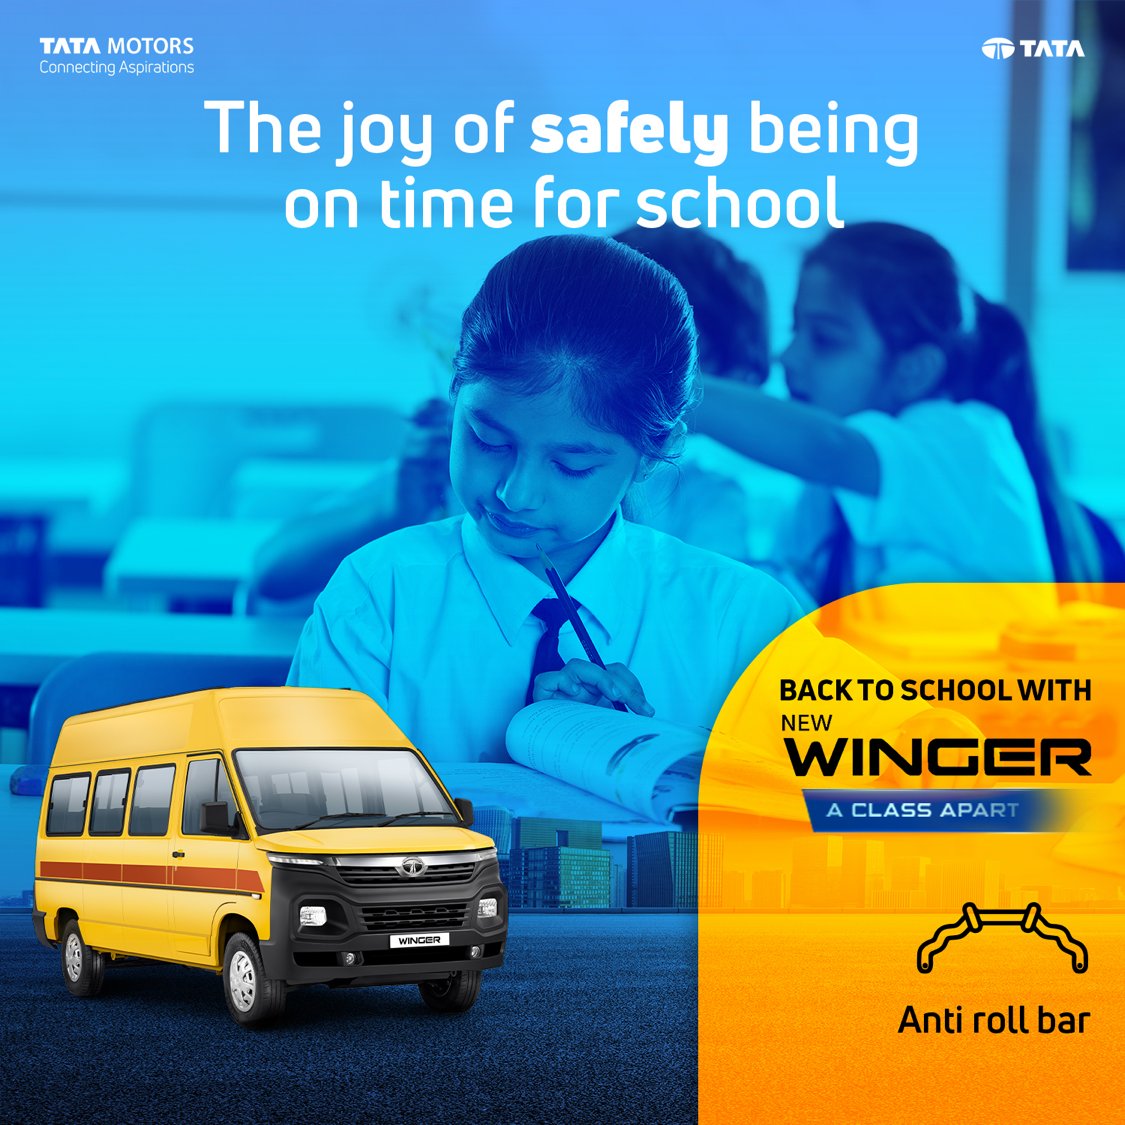 With features like power steering and an optimum turning circle radius, the Tata Winger School Van is built for efficient and timely journeys. This ensures children are always where they need to be, safely. 
#TataMotorsBS6Winger
Know more: https://t.co/CAAat7wPY5 https://t.co/IQjPFxyltl